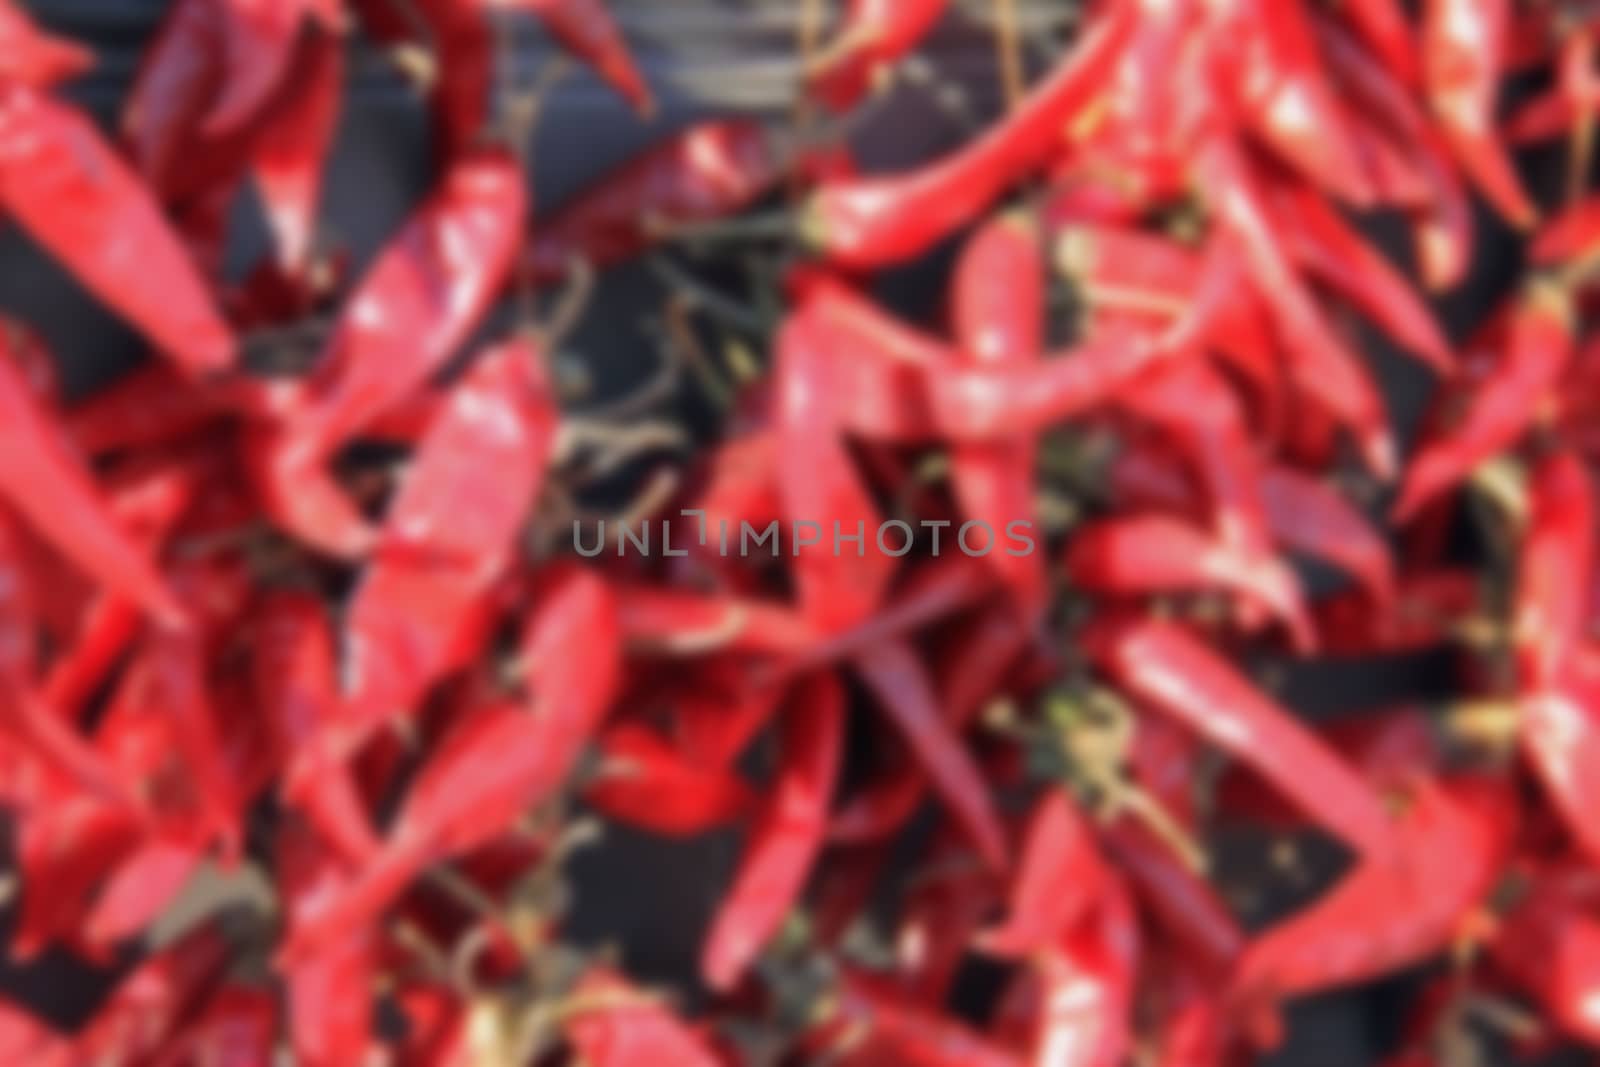 chili in a bundle ready for sale, chili background blurred